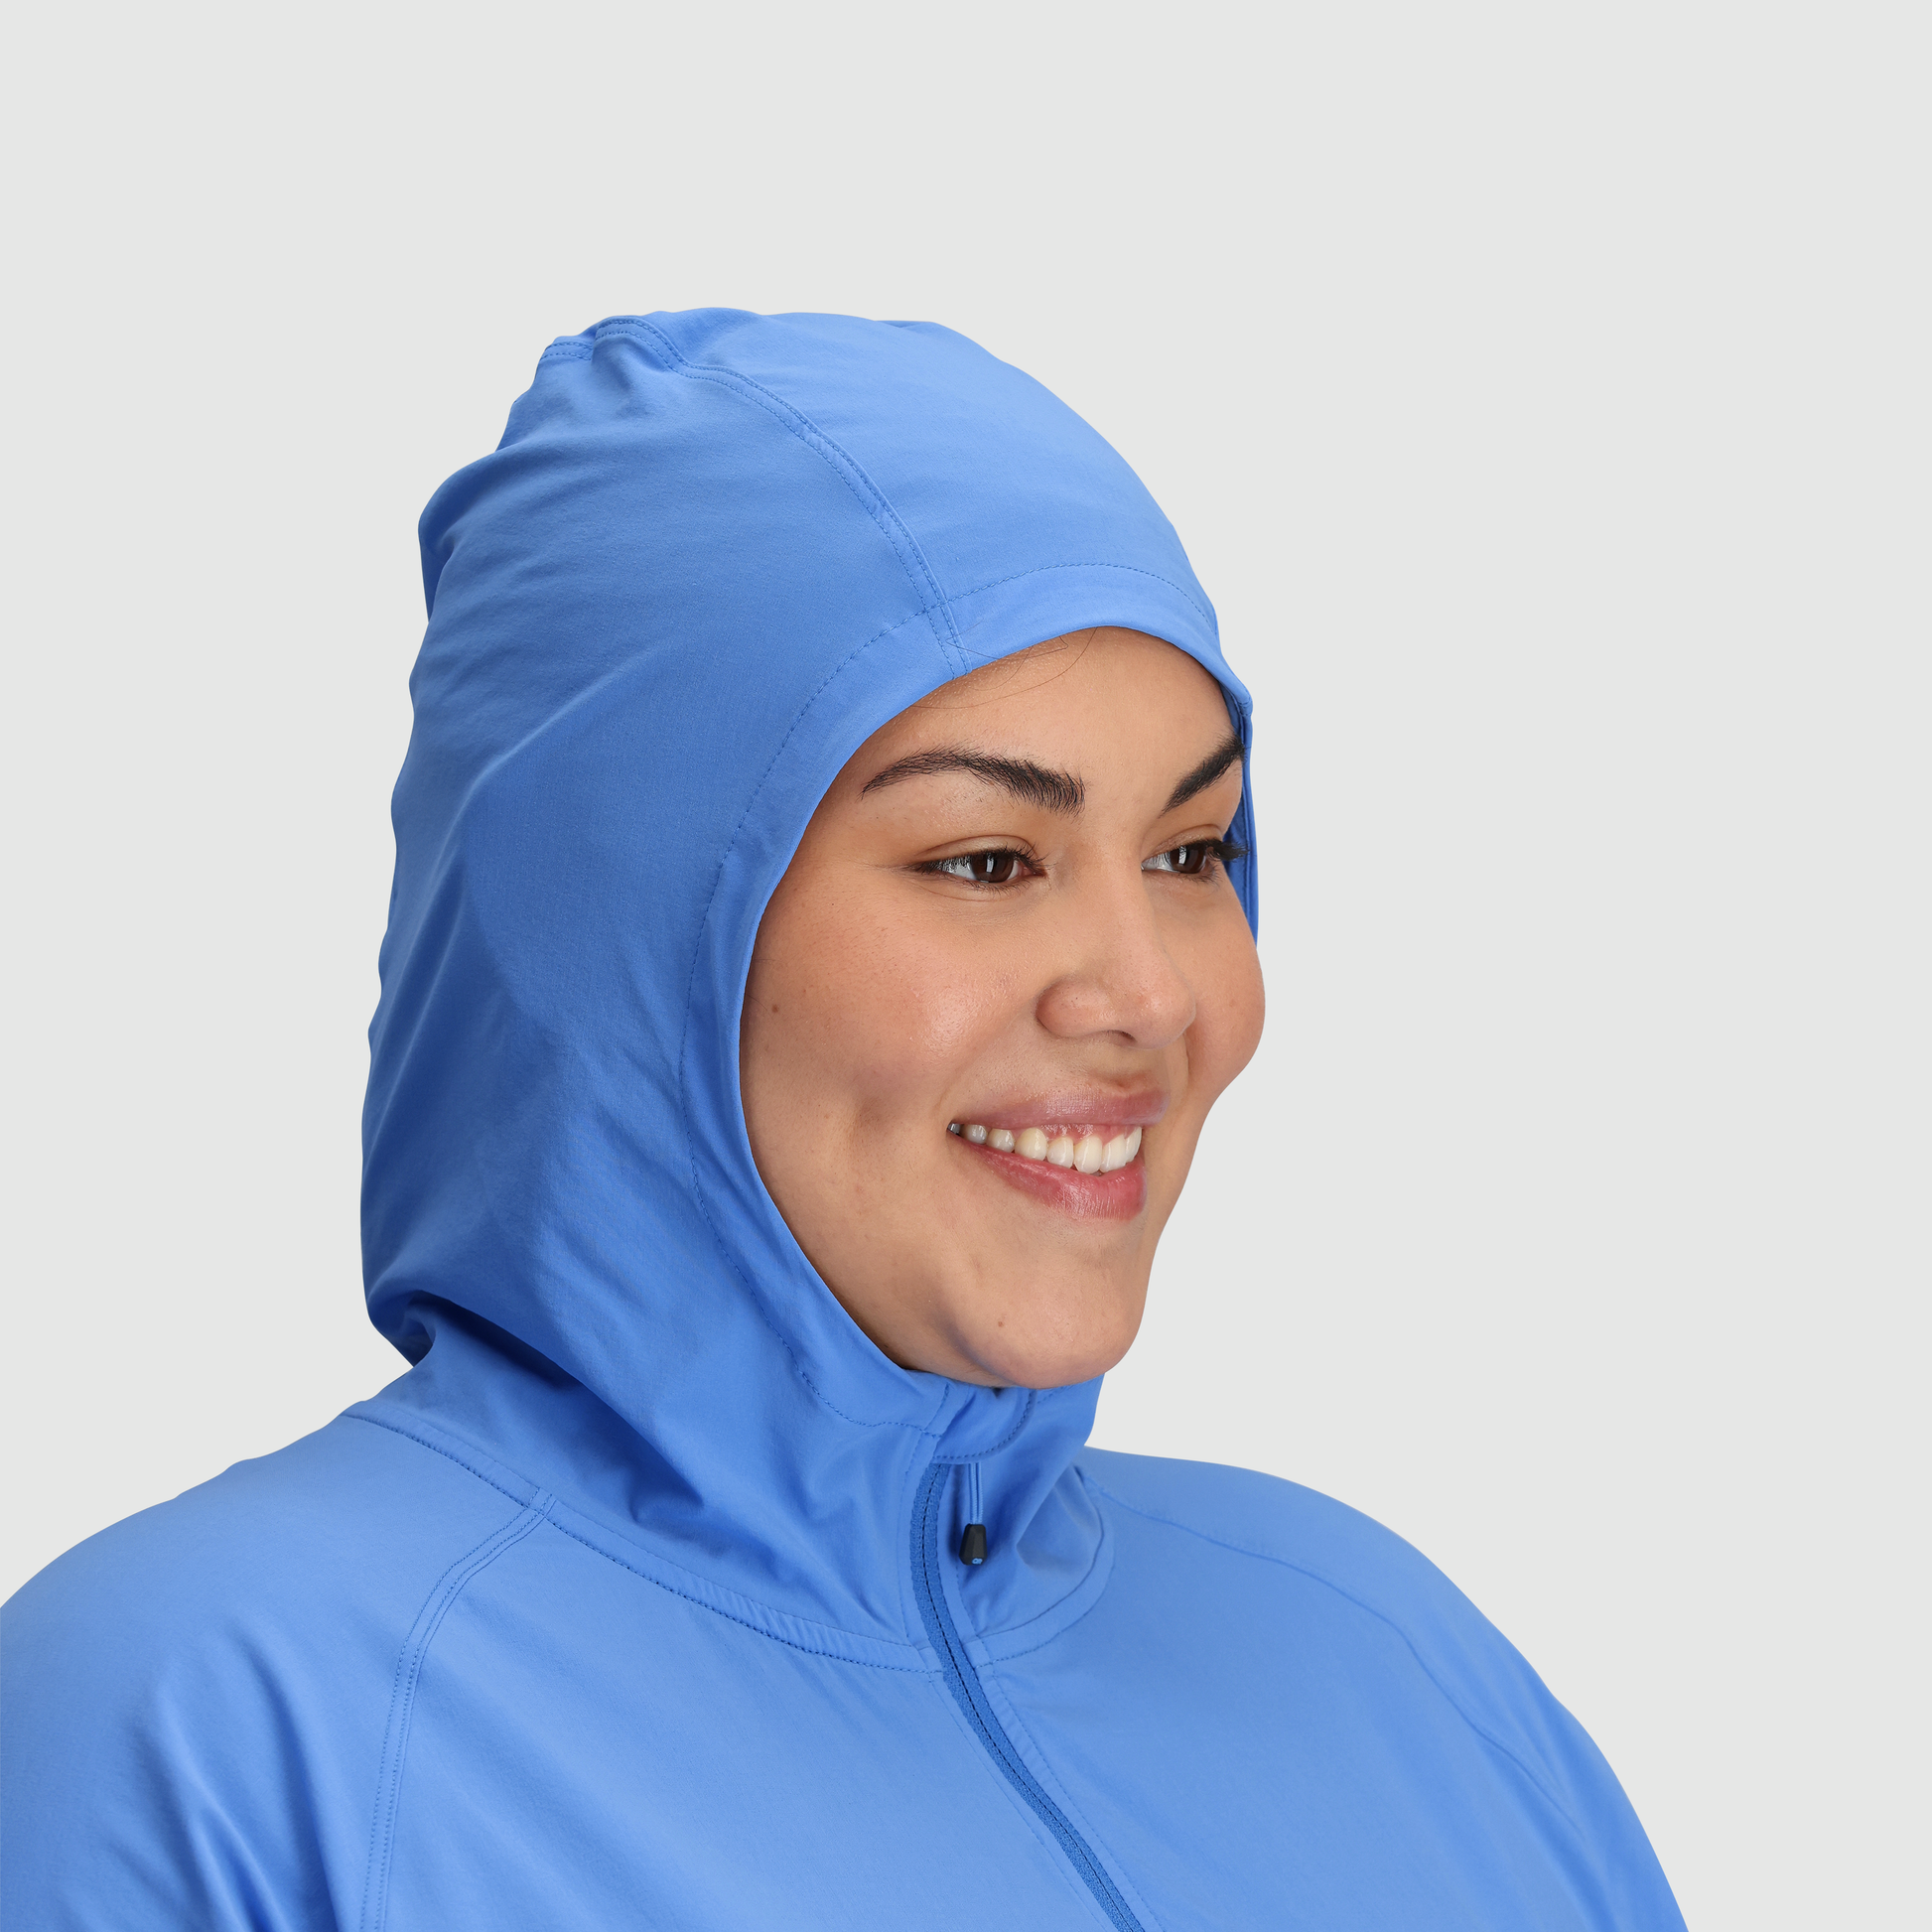 B2 :: Hood / Hold in warmth and keep out weather with this essential hood.